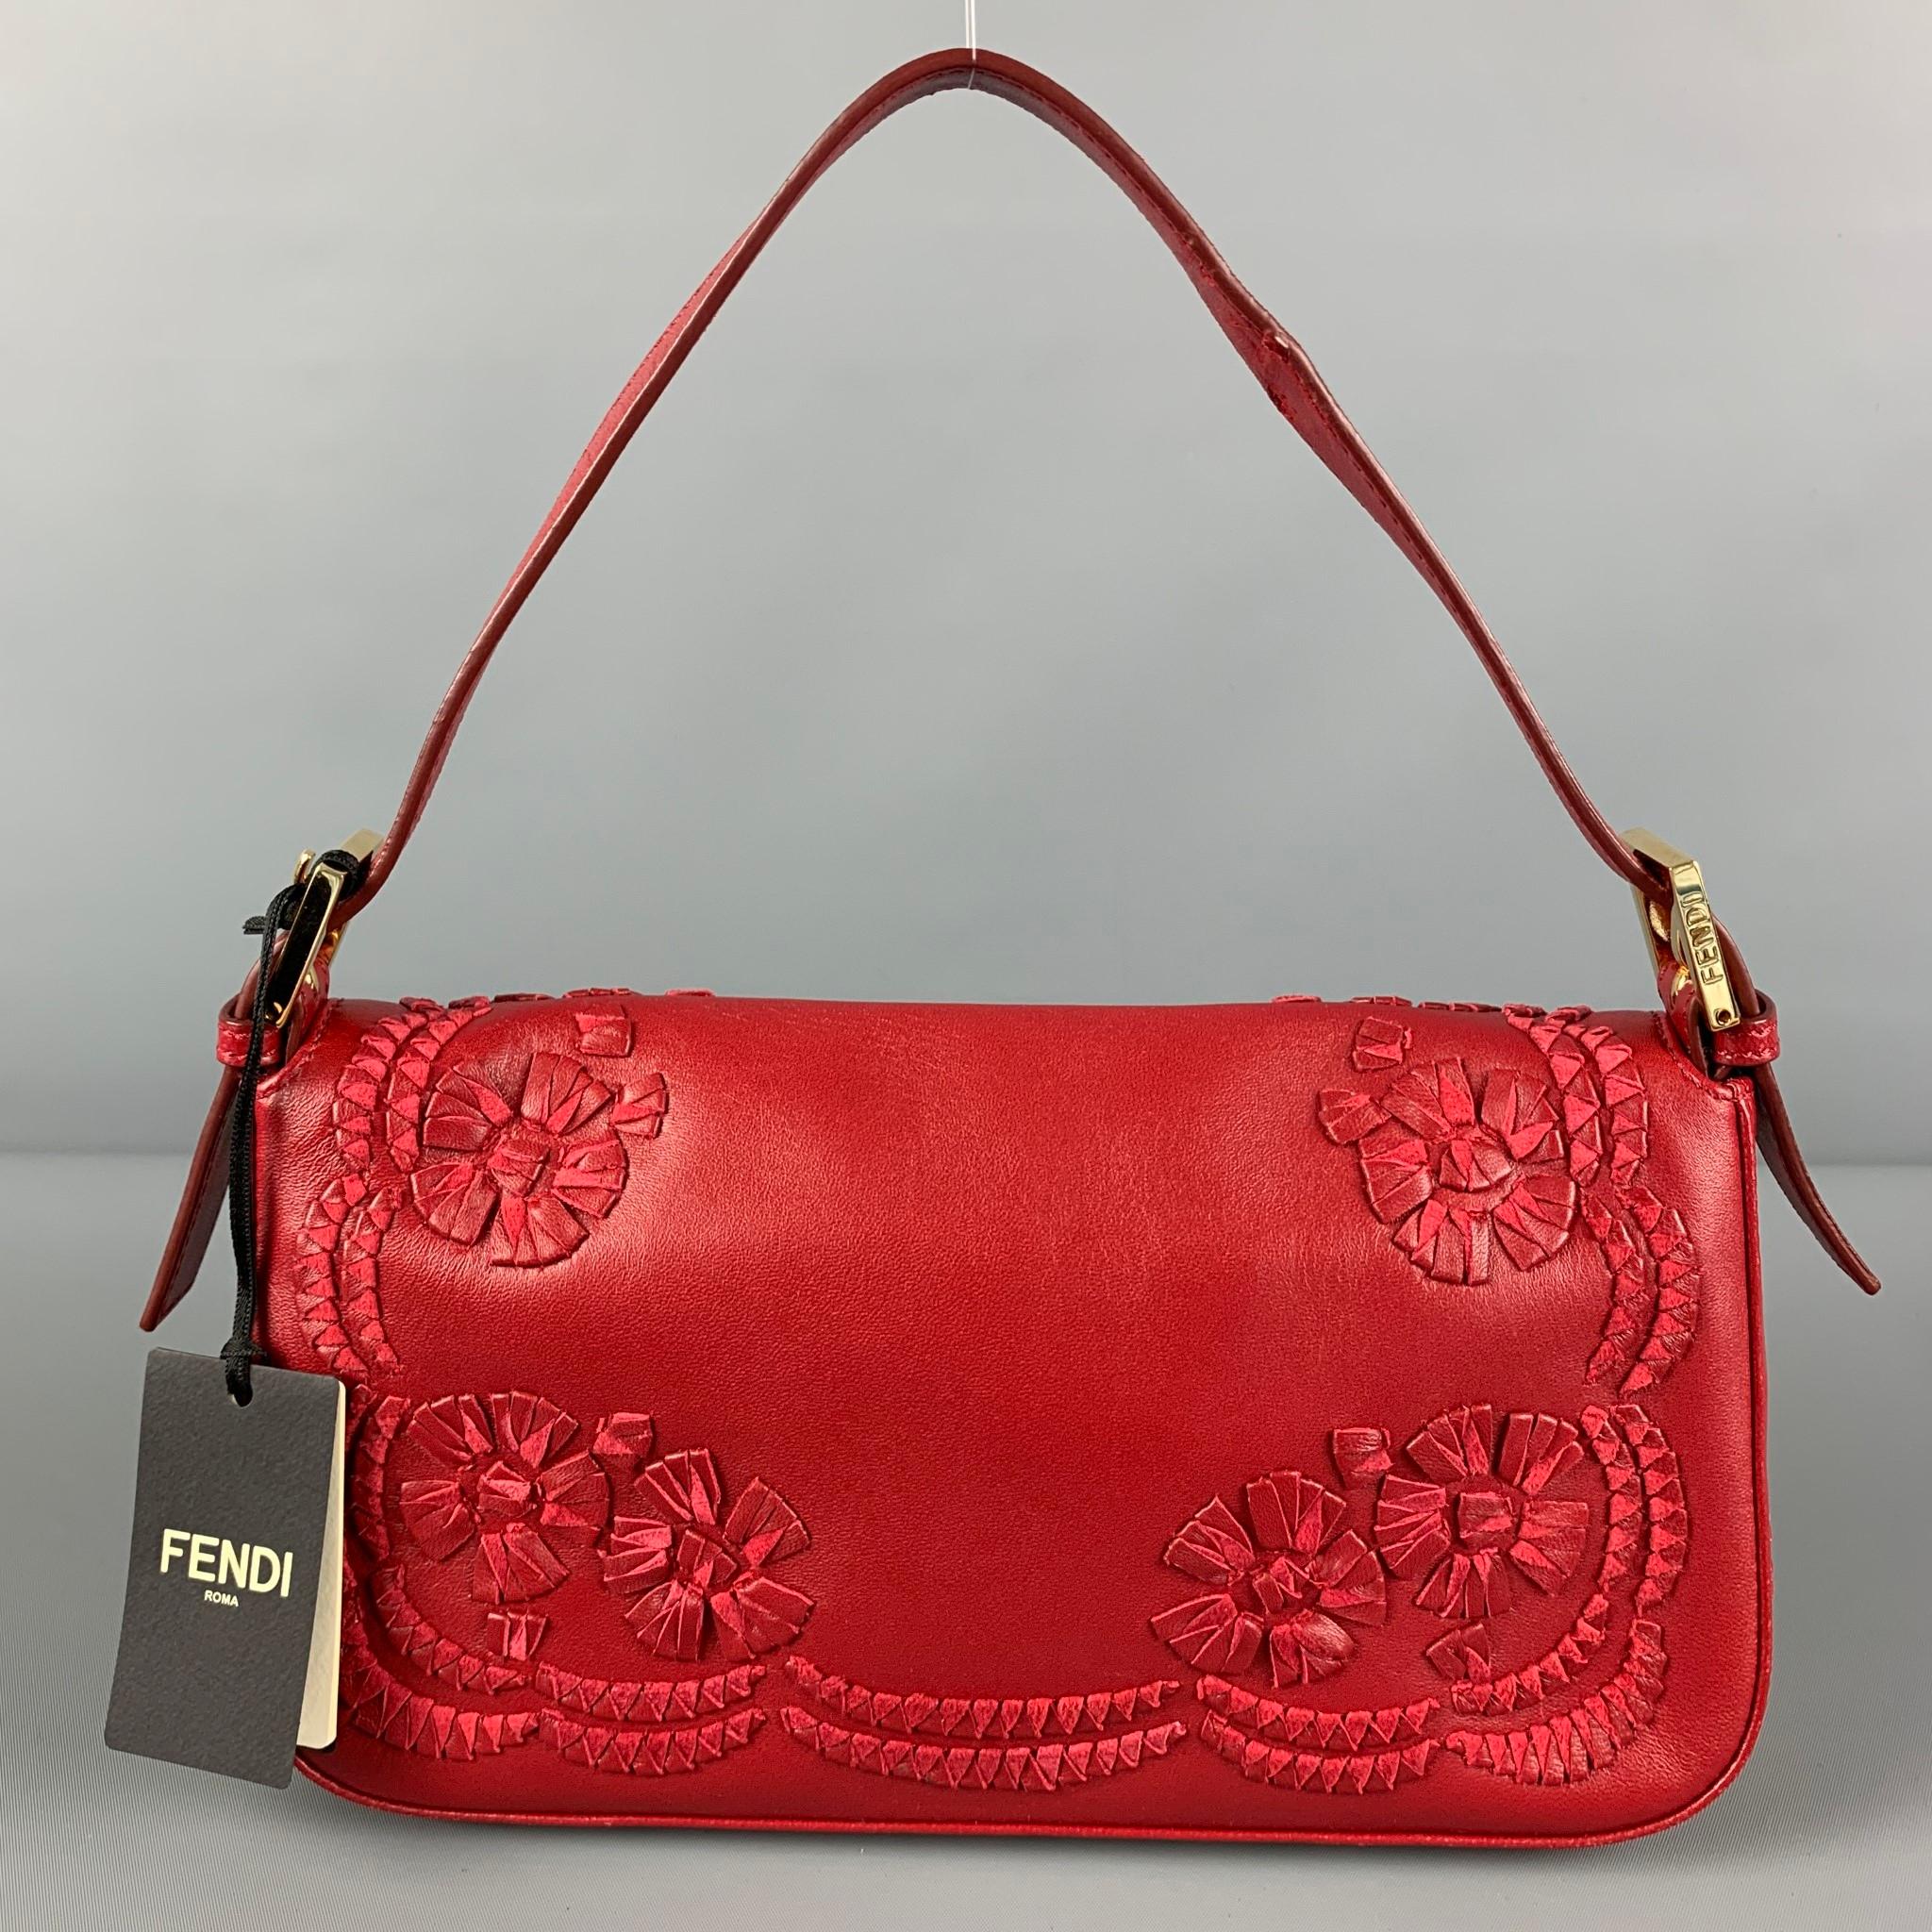 FENDI bag comes in a red leather featuring signature baguette design, triangolo printed flower details, gold tone hardware, inner slot, adjustable top handle, and a snap button closure. Includes tags and dust bag. Made in Italy. 

Very Good